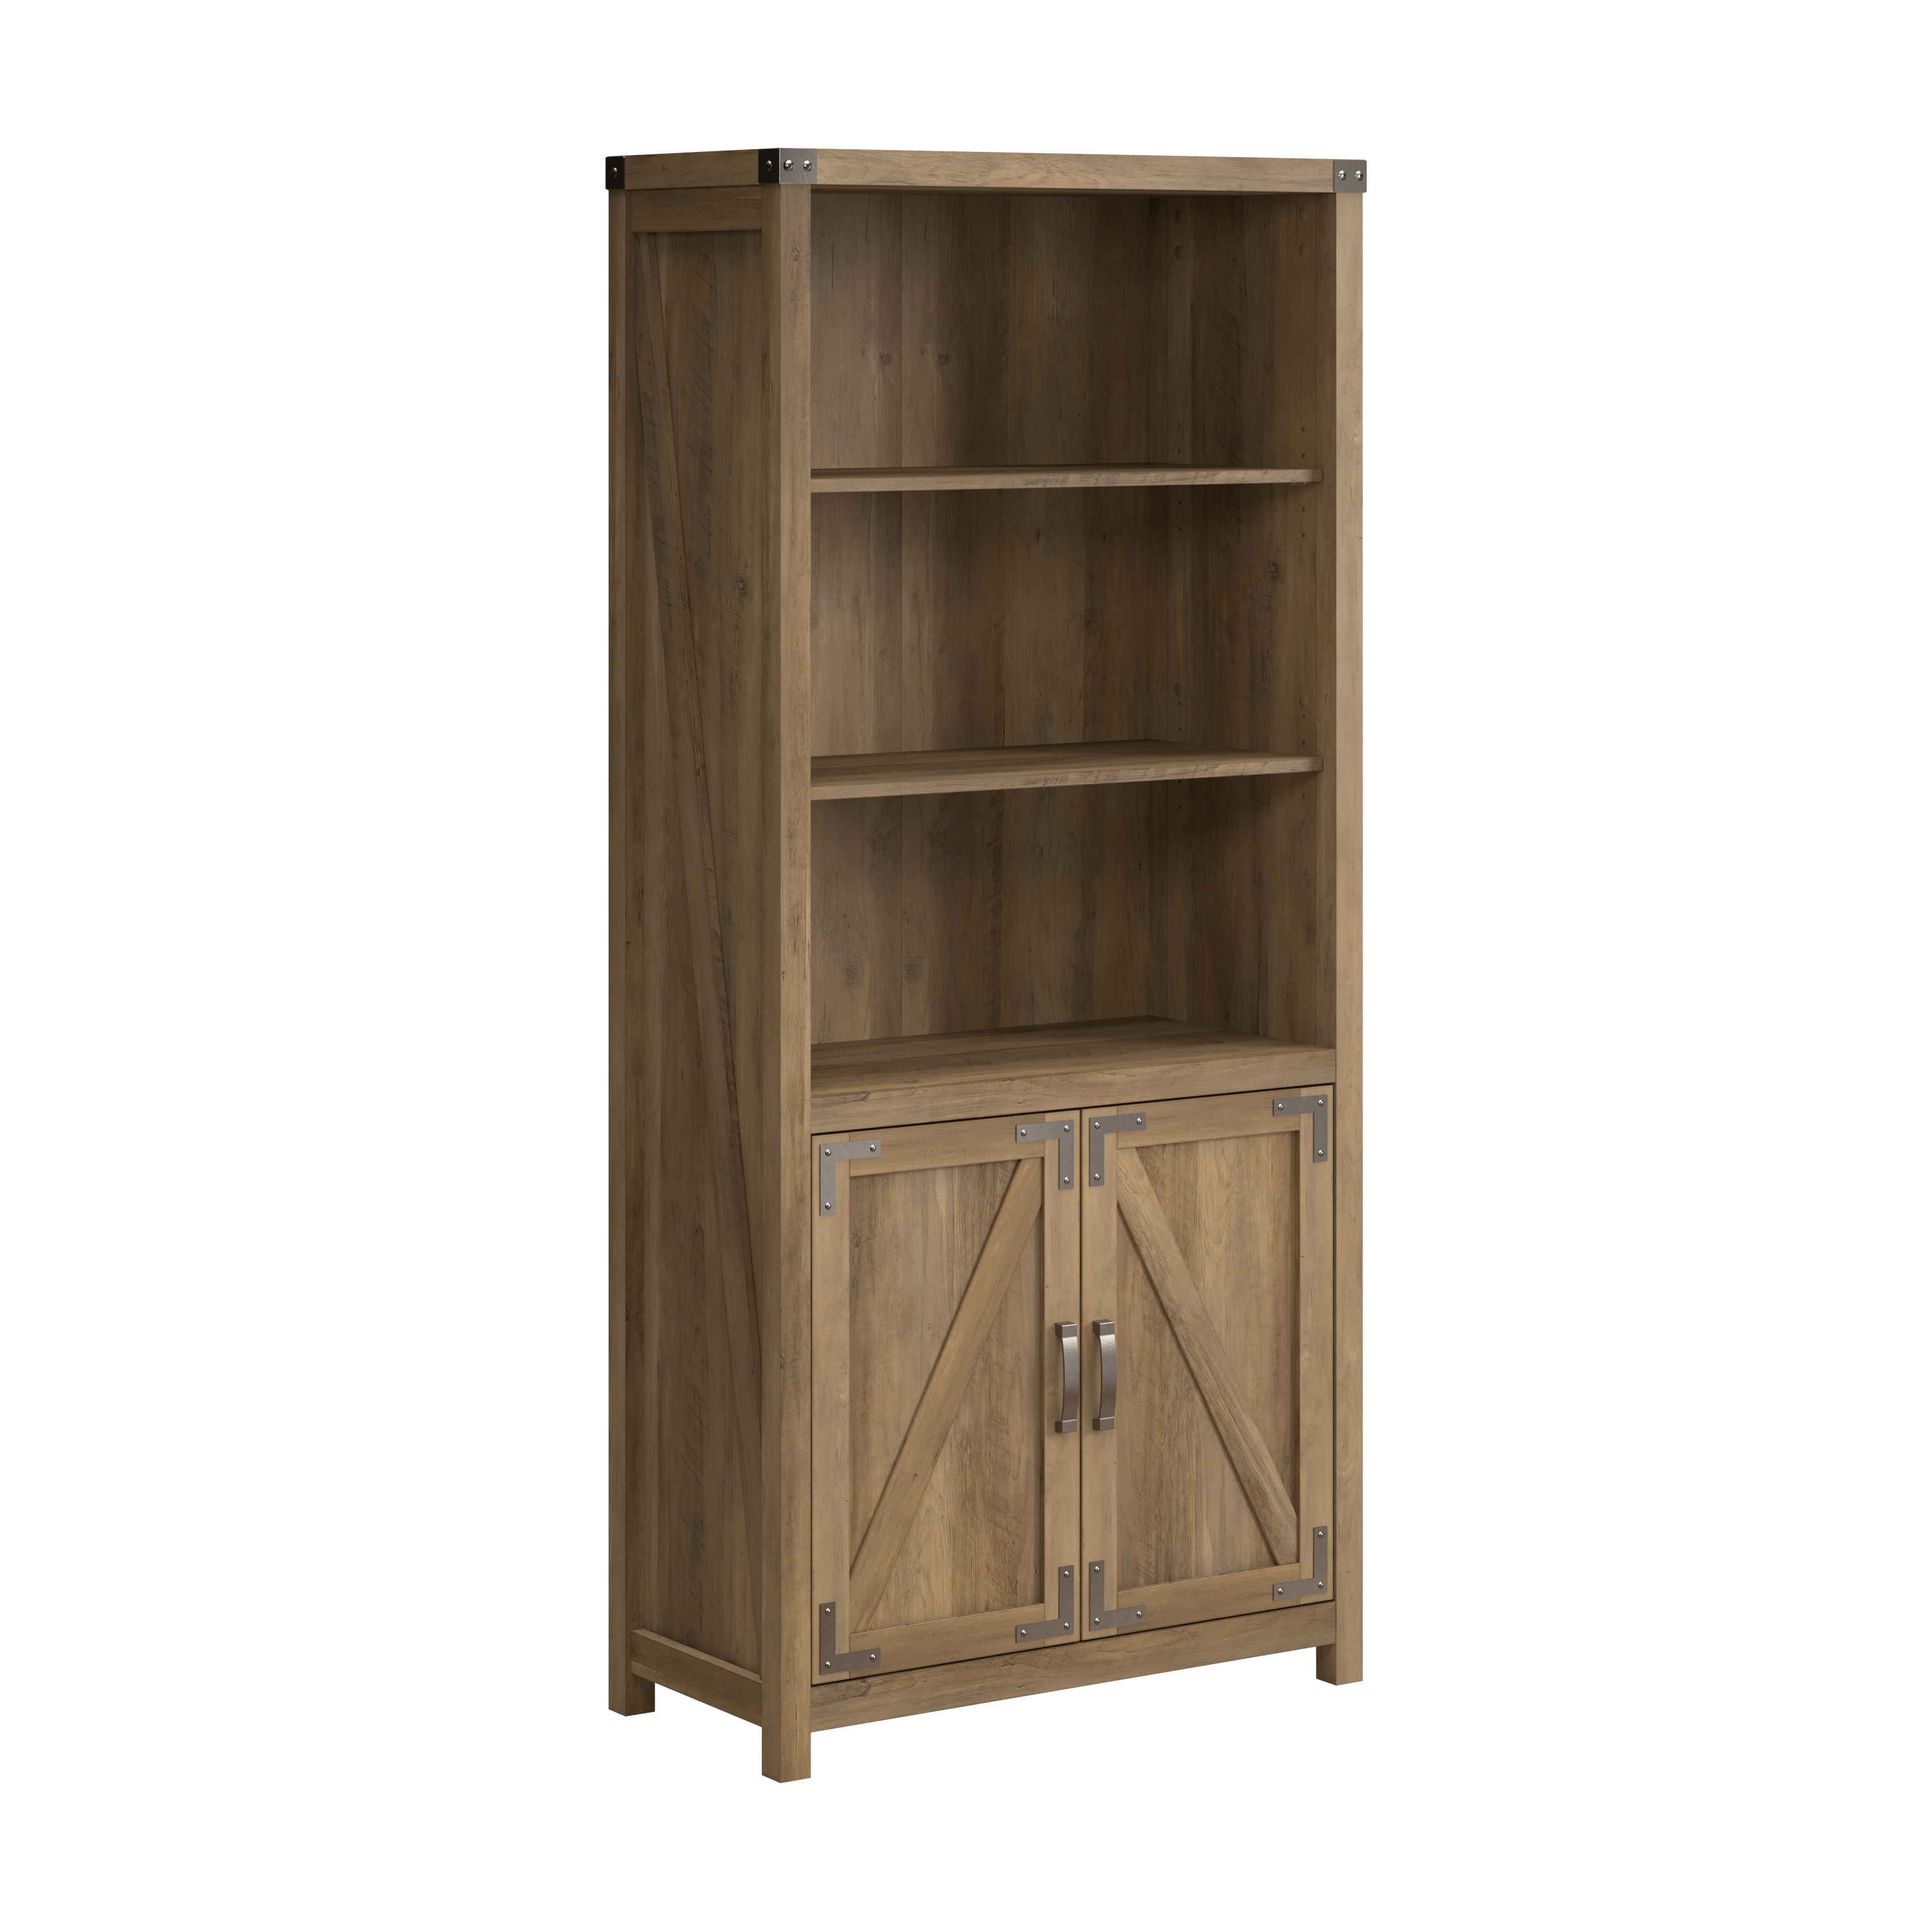 Shop Bush Furniture Knoxville Tall 5 Shelf Bookcase with Doors 02 CGB132RCP-03 #color_reclaimed pine